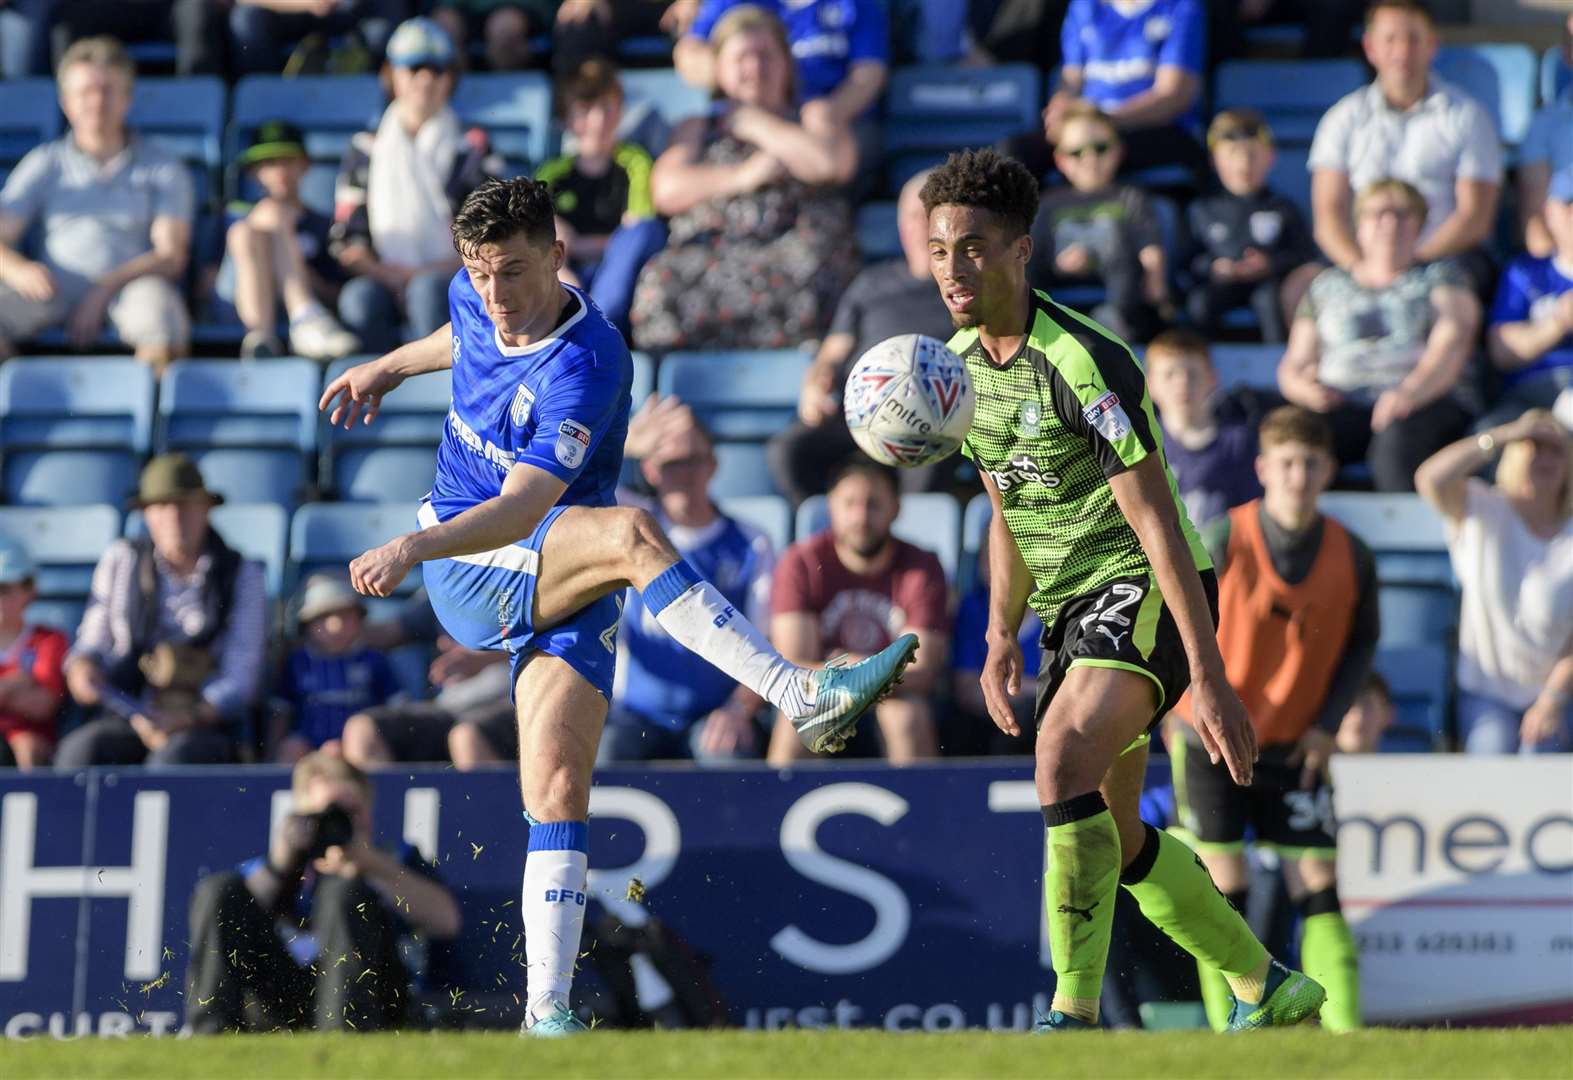 Callum Reilly aims a cross. Gillingham FC (blue) vs Plymouth Argyle, League One football action from Priestfield Stadium, Redfern Avenue, Gillingham.Picture: Andy Payton (1862022)